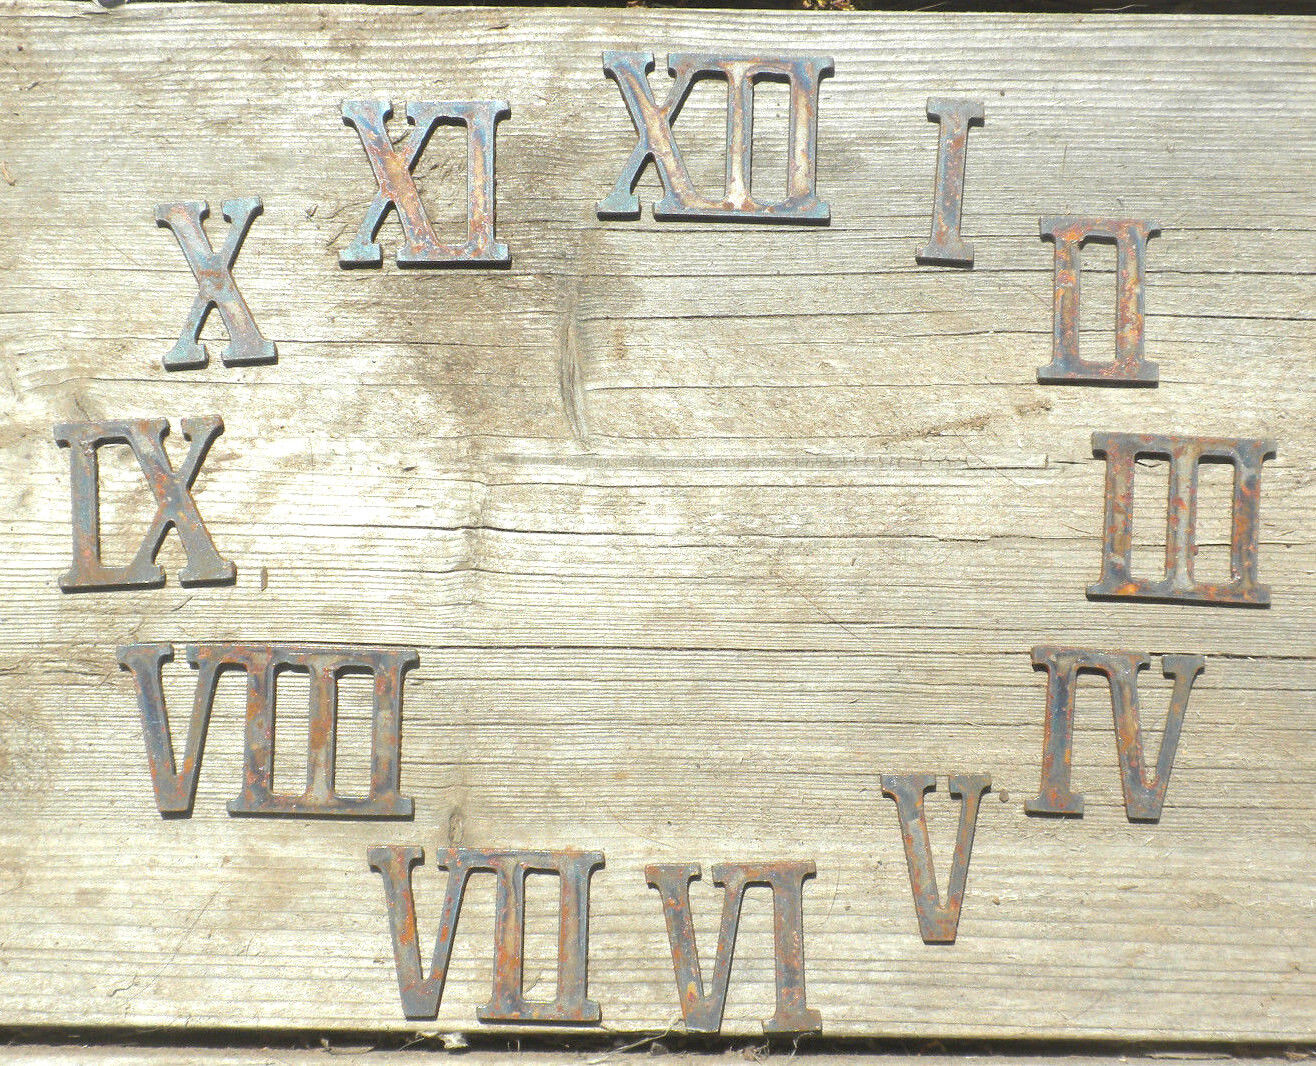 4 inch Rough Rusty Metal Vintage Roman Numeral Number Full Clock Face Set (1-12)